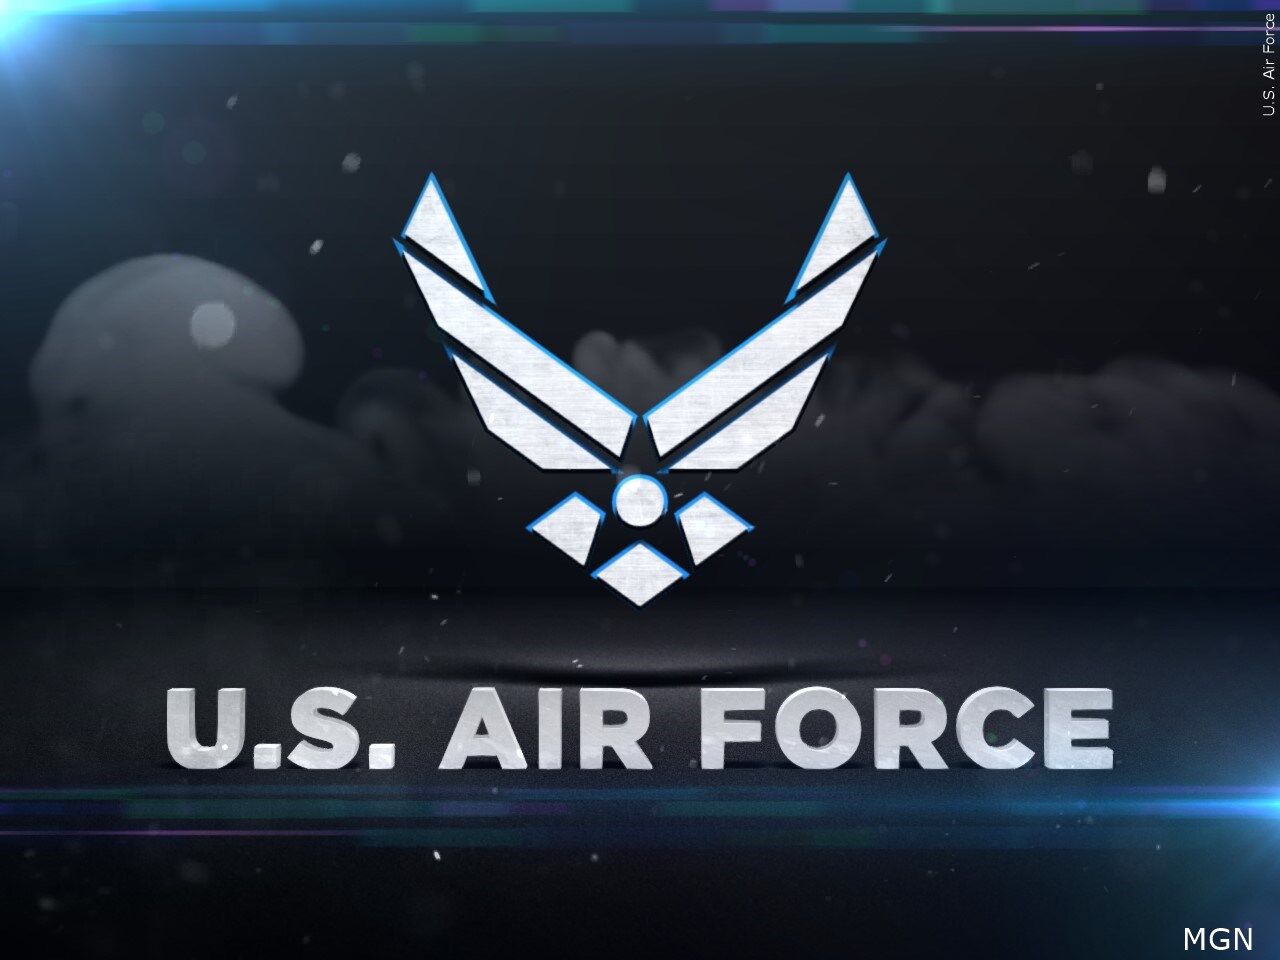 Air Force Logo Wallpapers Hd | coolstyle wallpapers.com | Air force  wallpaper, Logo wallpaper hd, Air force